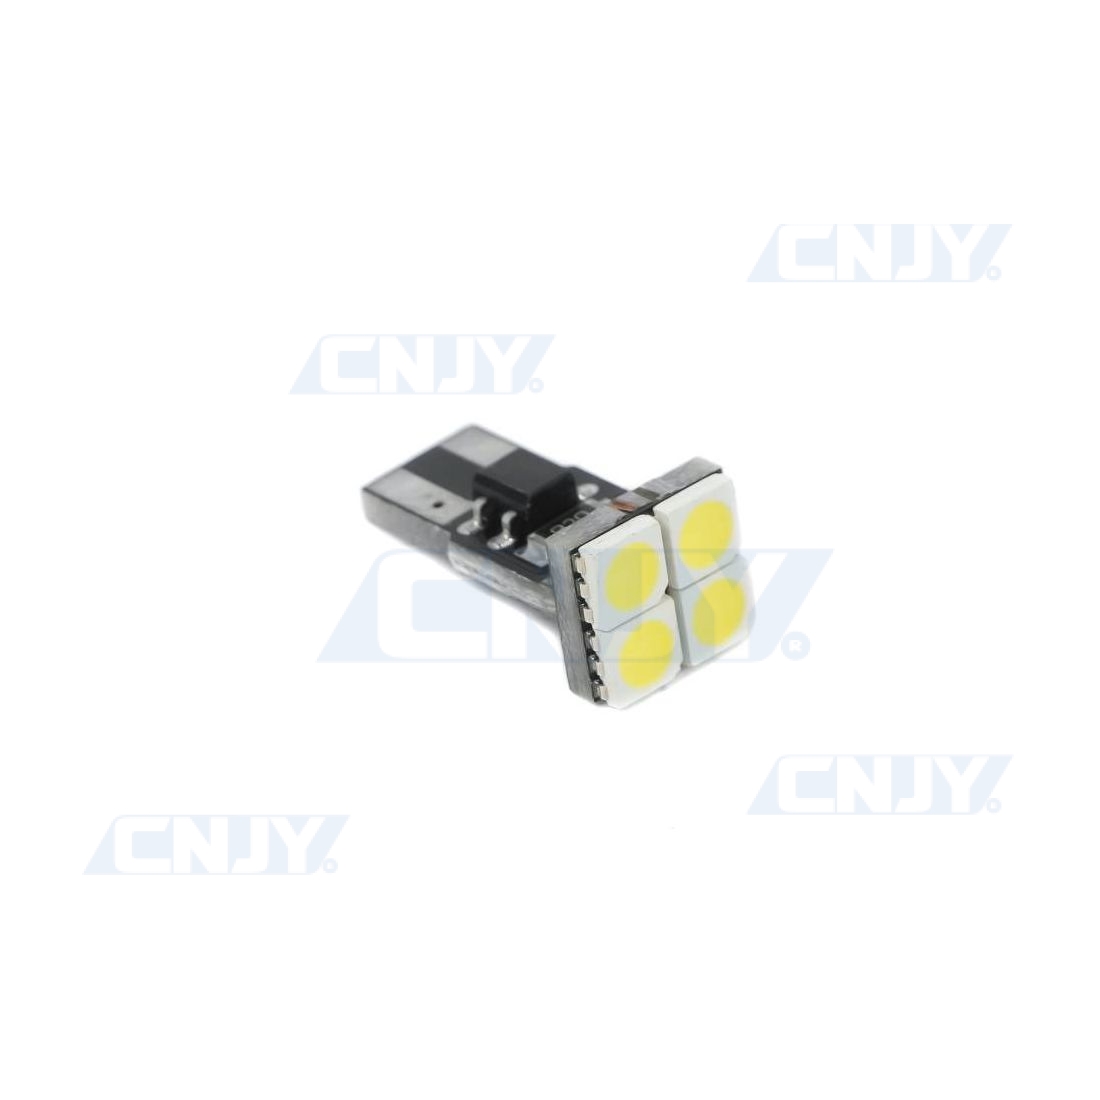 https://www.cnjy-led.fr/11752-thickbox_default/ampoule-led-w5w-t10-12v-4-led-face-smd-anti-erreur-canbus-odb.jpg